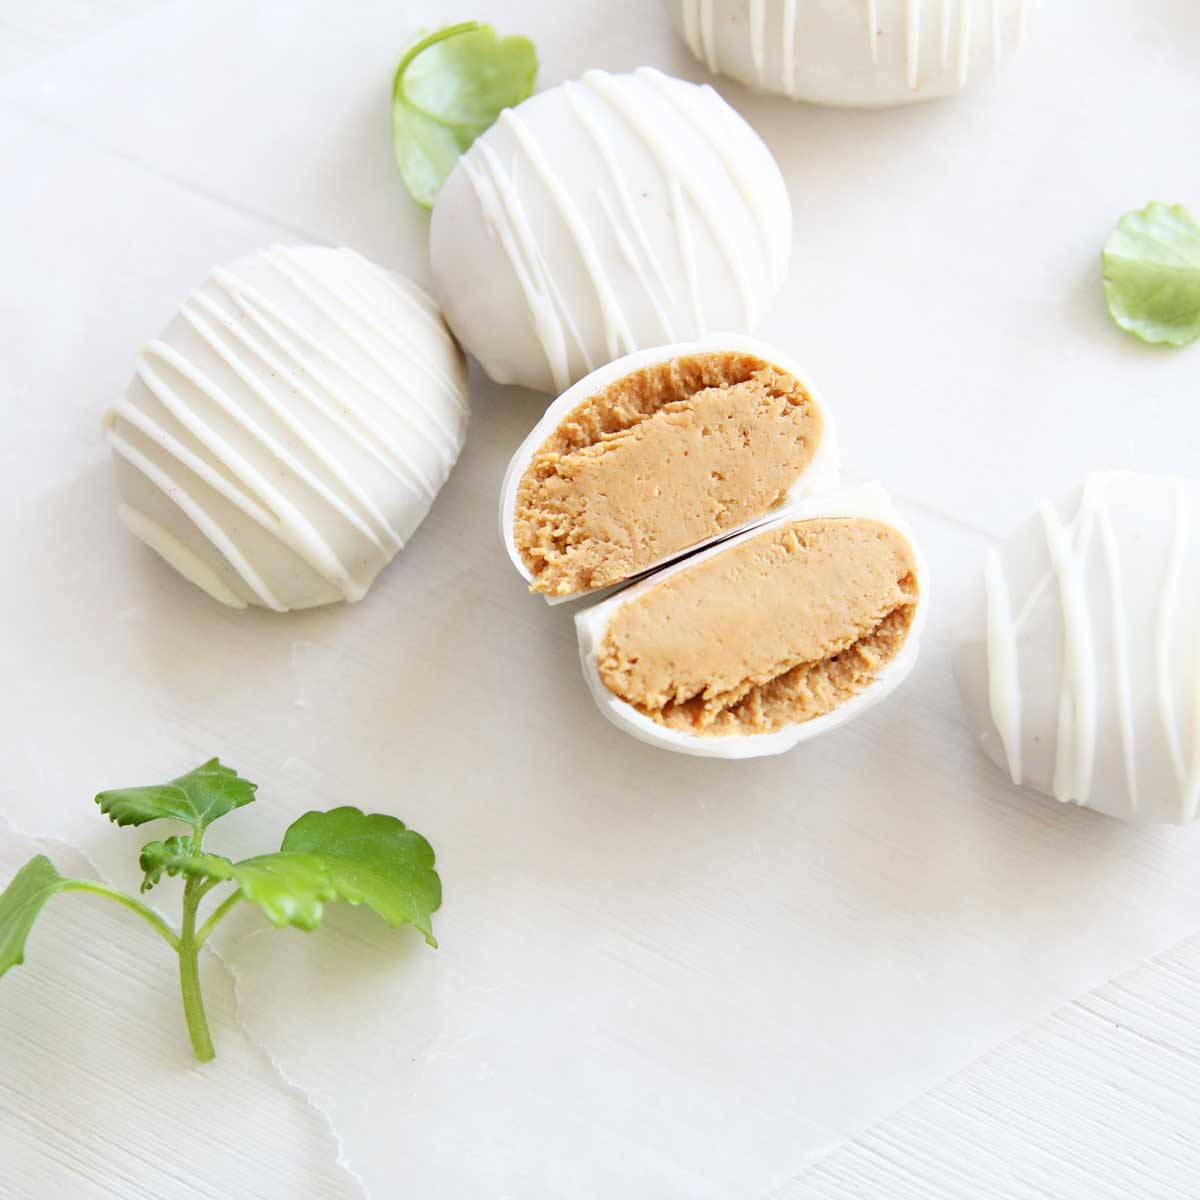 Easy Greek Yogurt & Peanut Butter Easter Eggs with White Chocolate - Peanut Butter Snow Skin Mooncakes